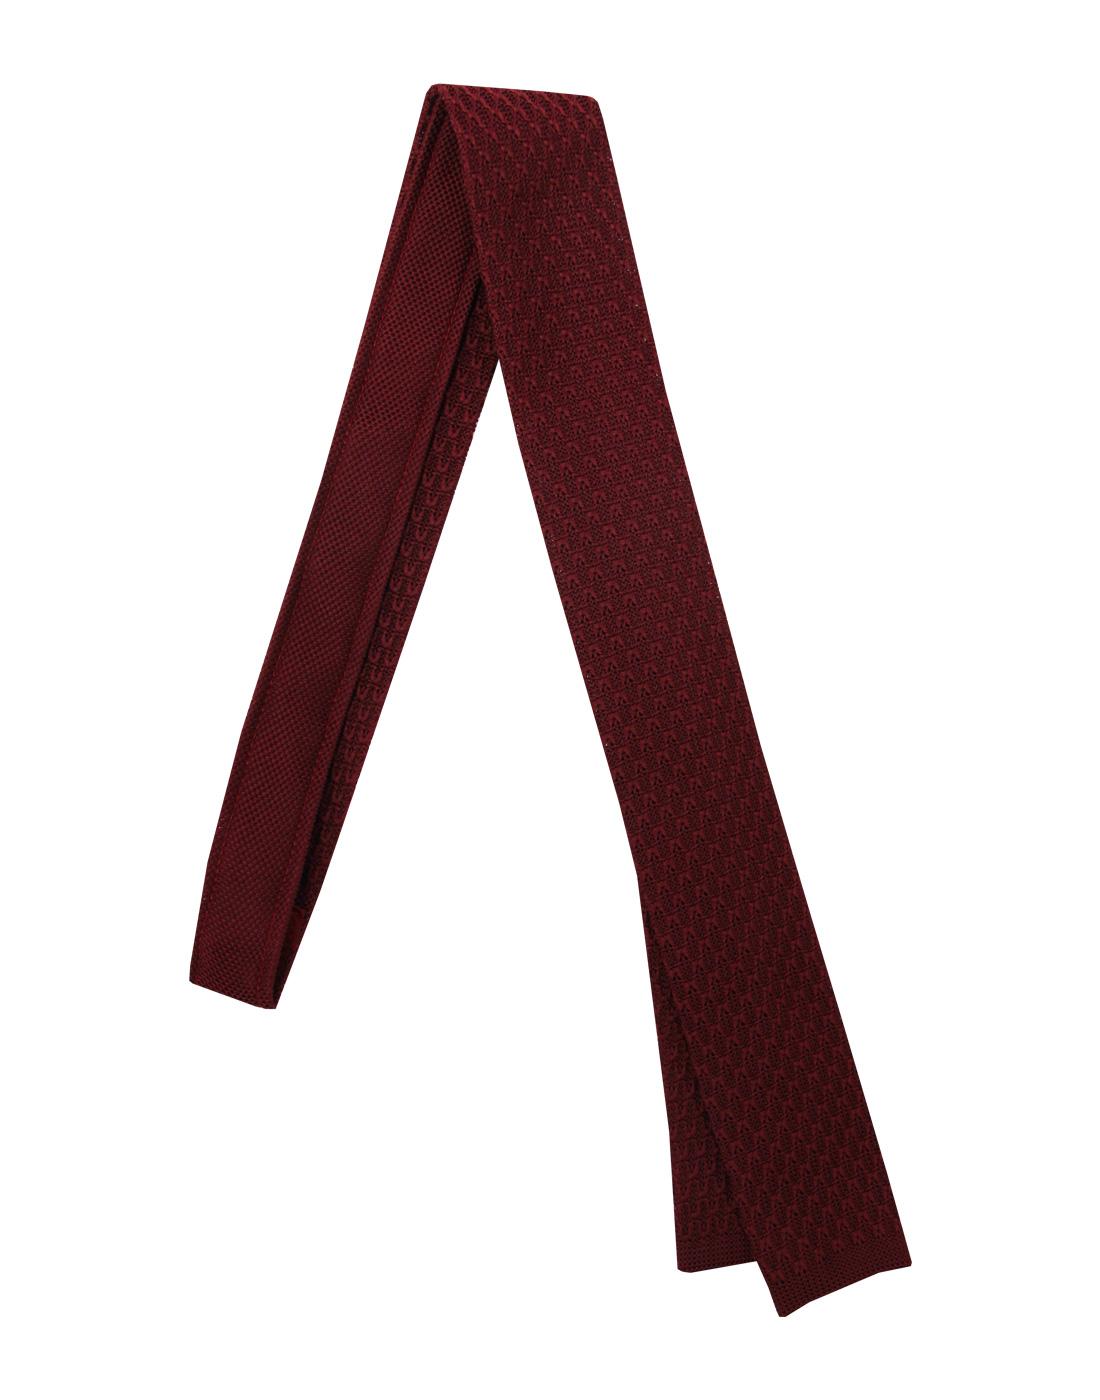 GIBSON LONDON Retro 1960s Mod Knitted Square End Tie in Burgundy